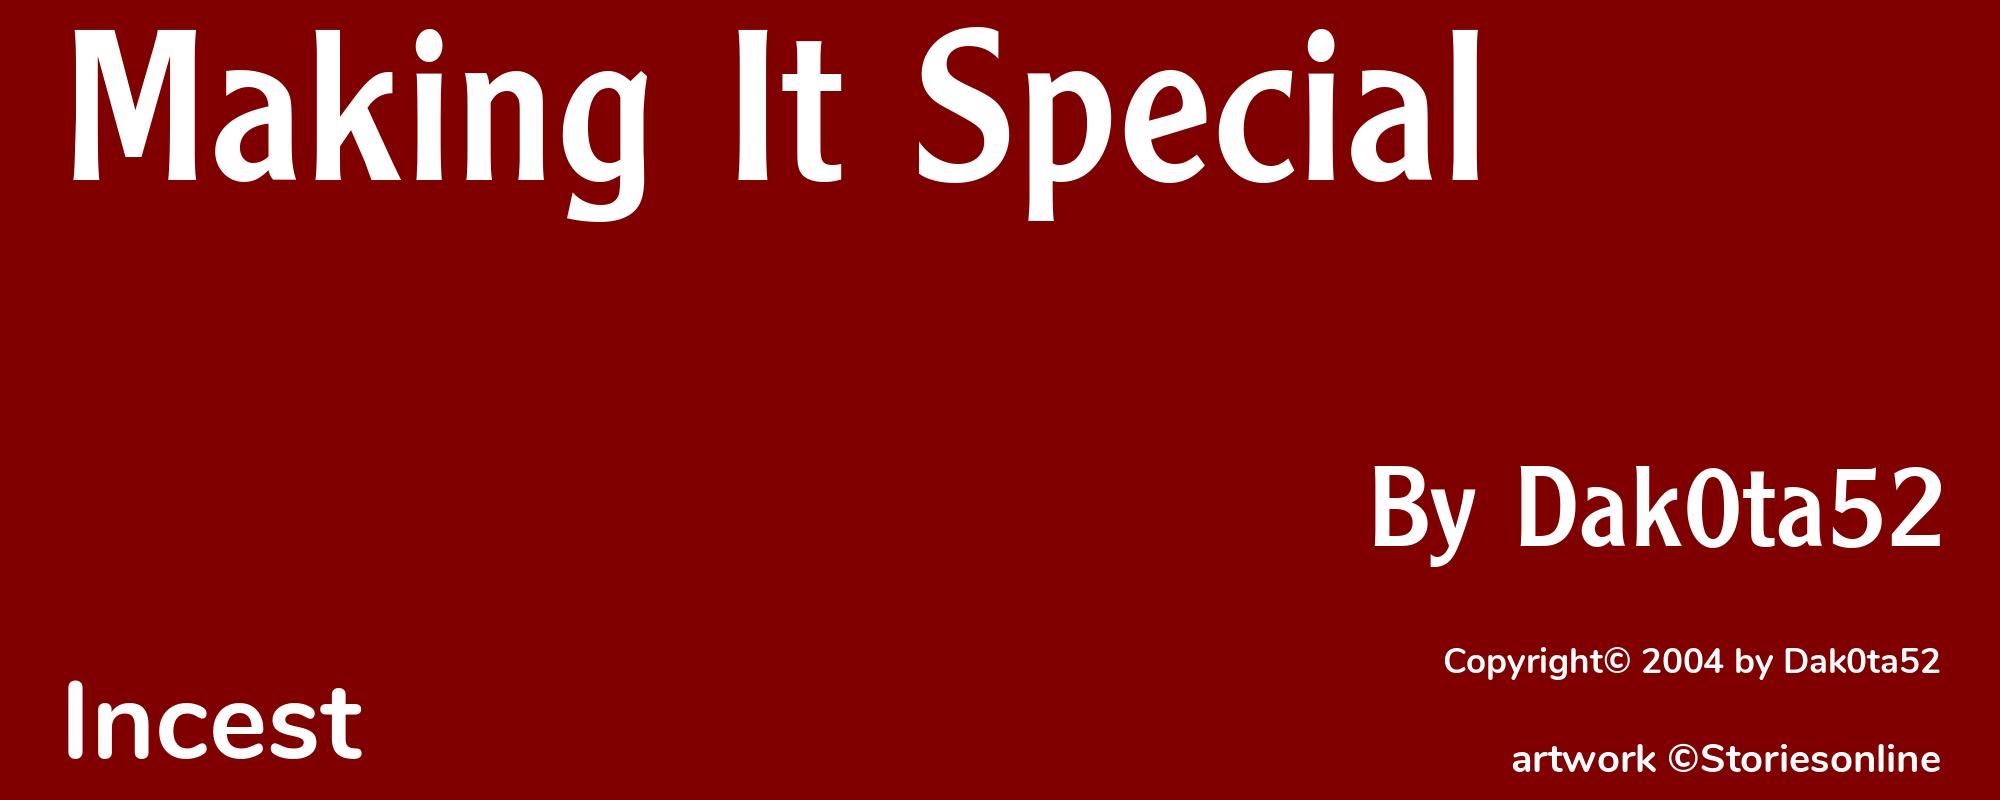 Making It Special - Cover